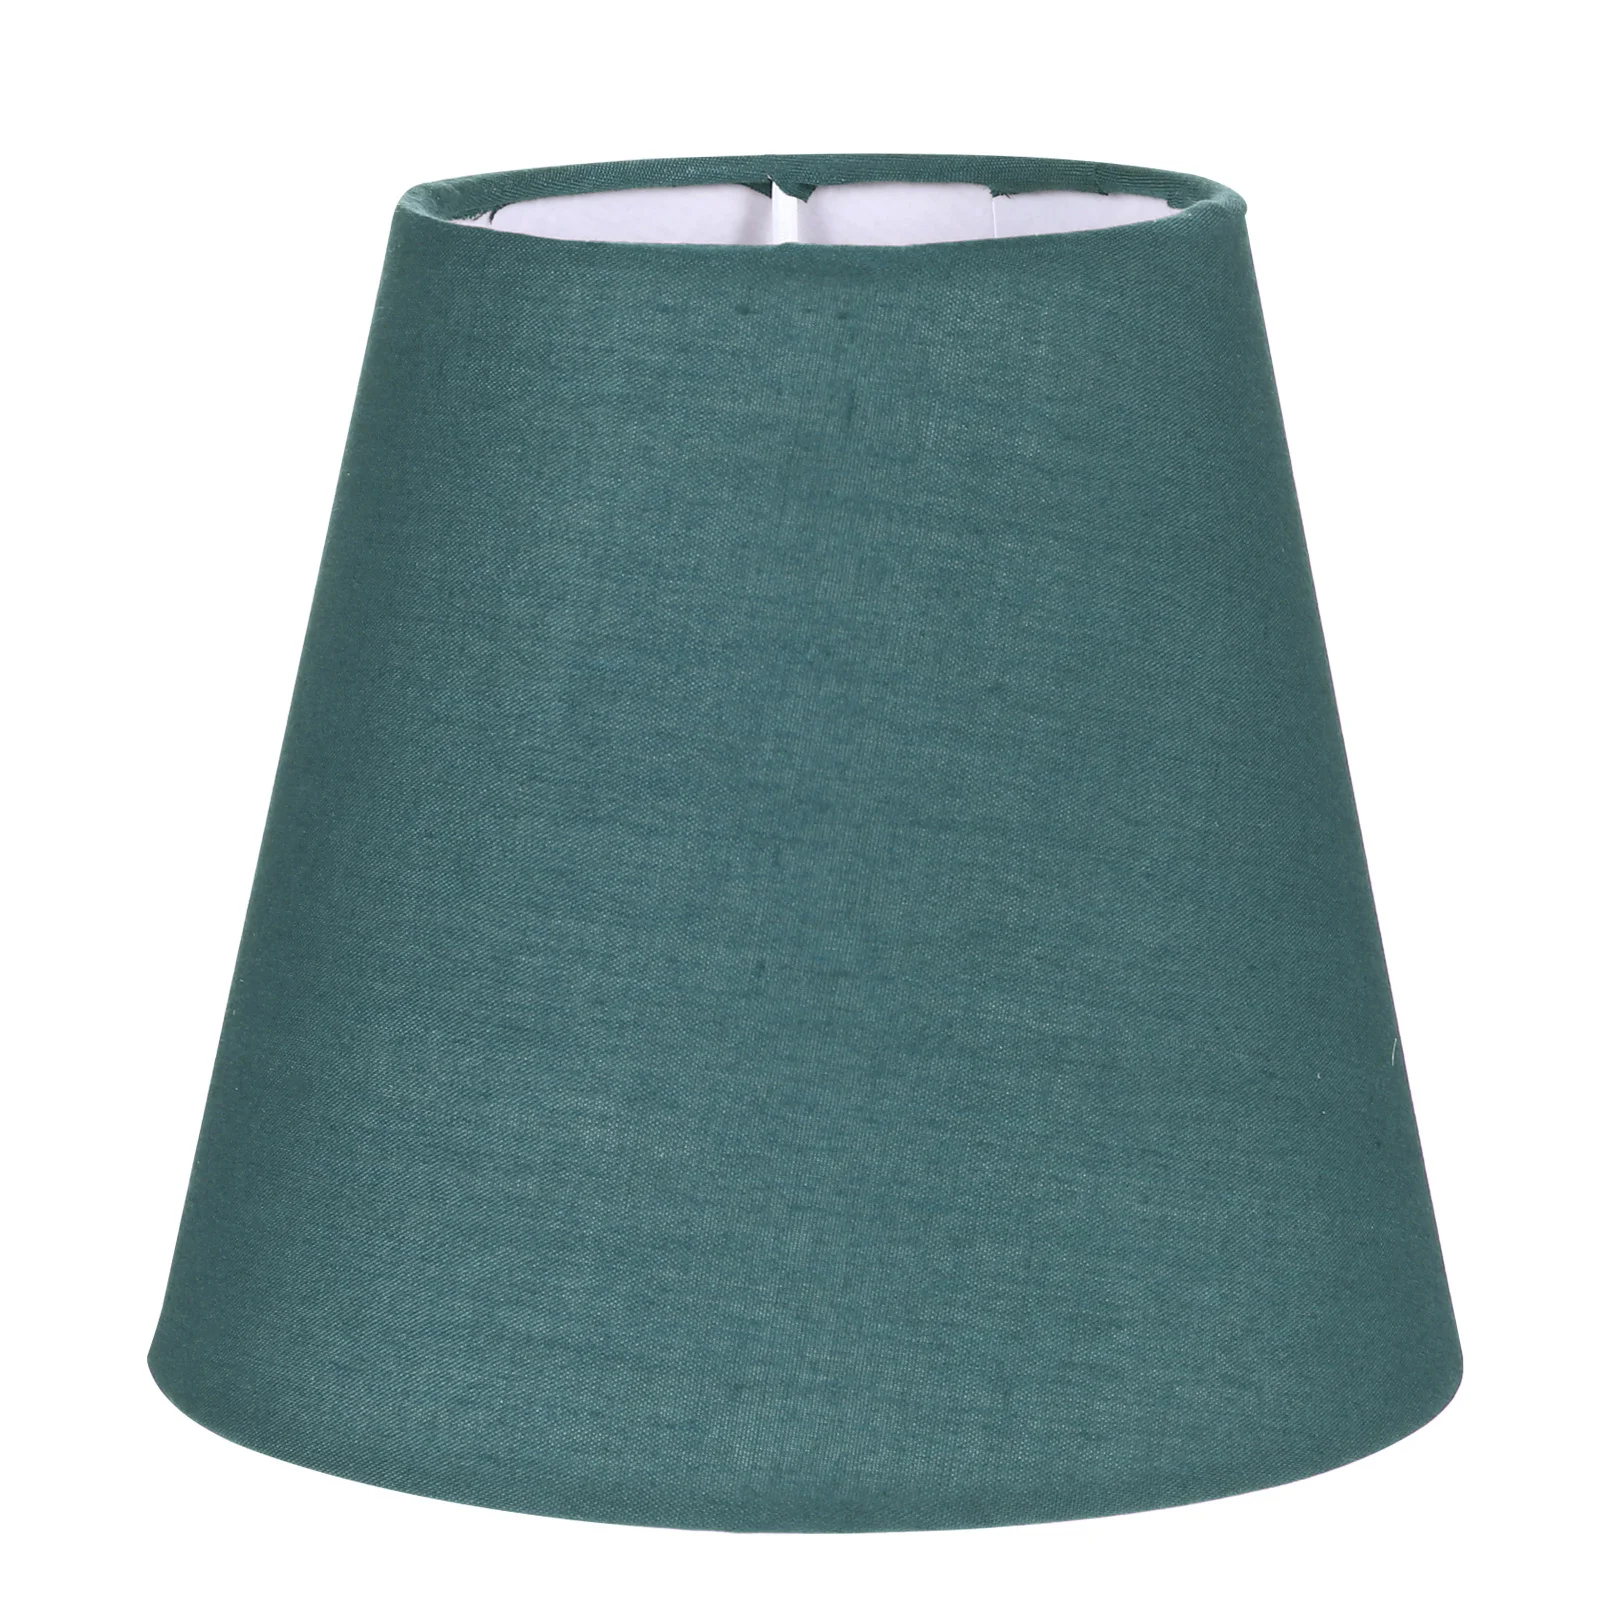 

Lamp Shade Lampshade Cover Table Cloth Shades Light For Chandelier Barrel Black Dust Lampshades Wall Ceiling Floor Chandeliers